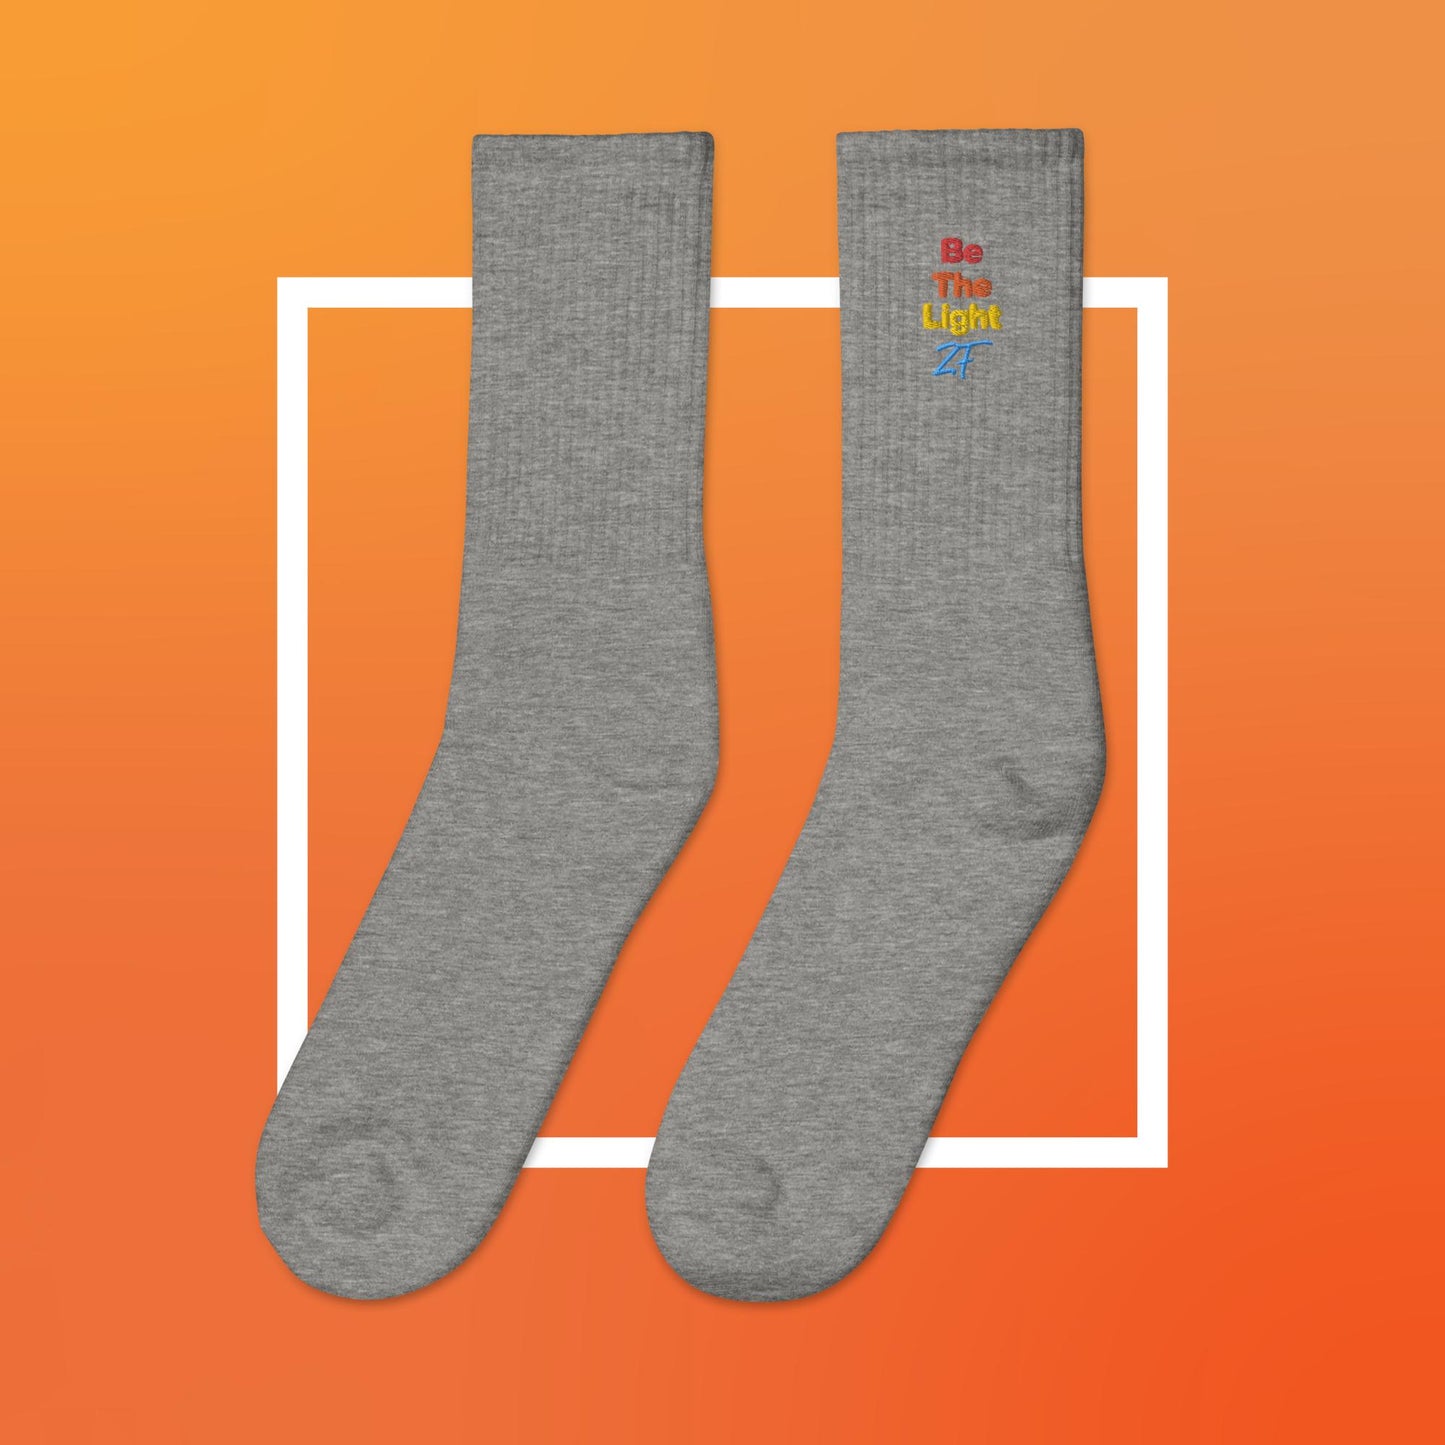 Embroidered socks - Be The Light